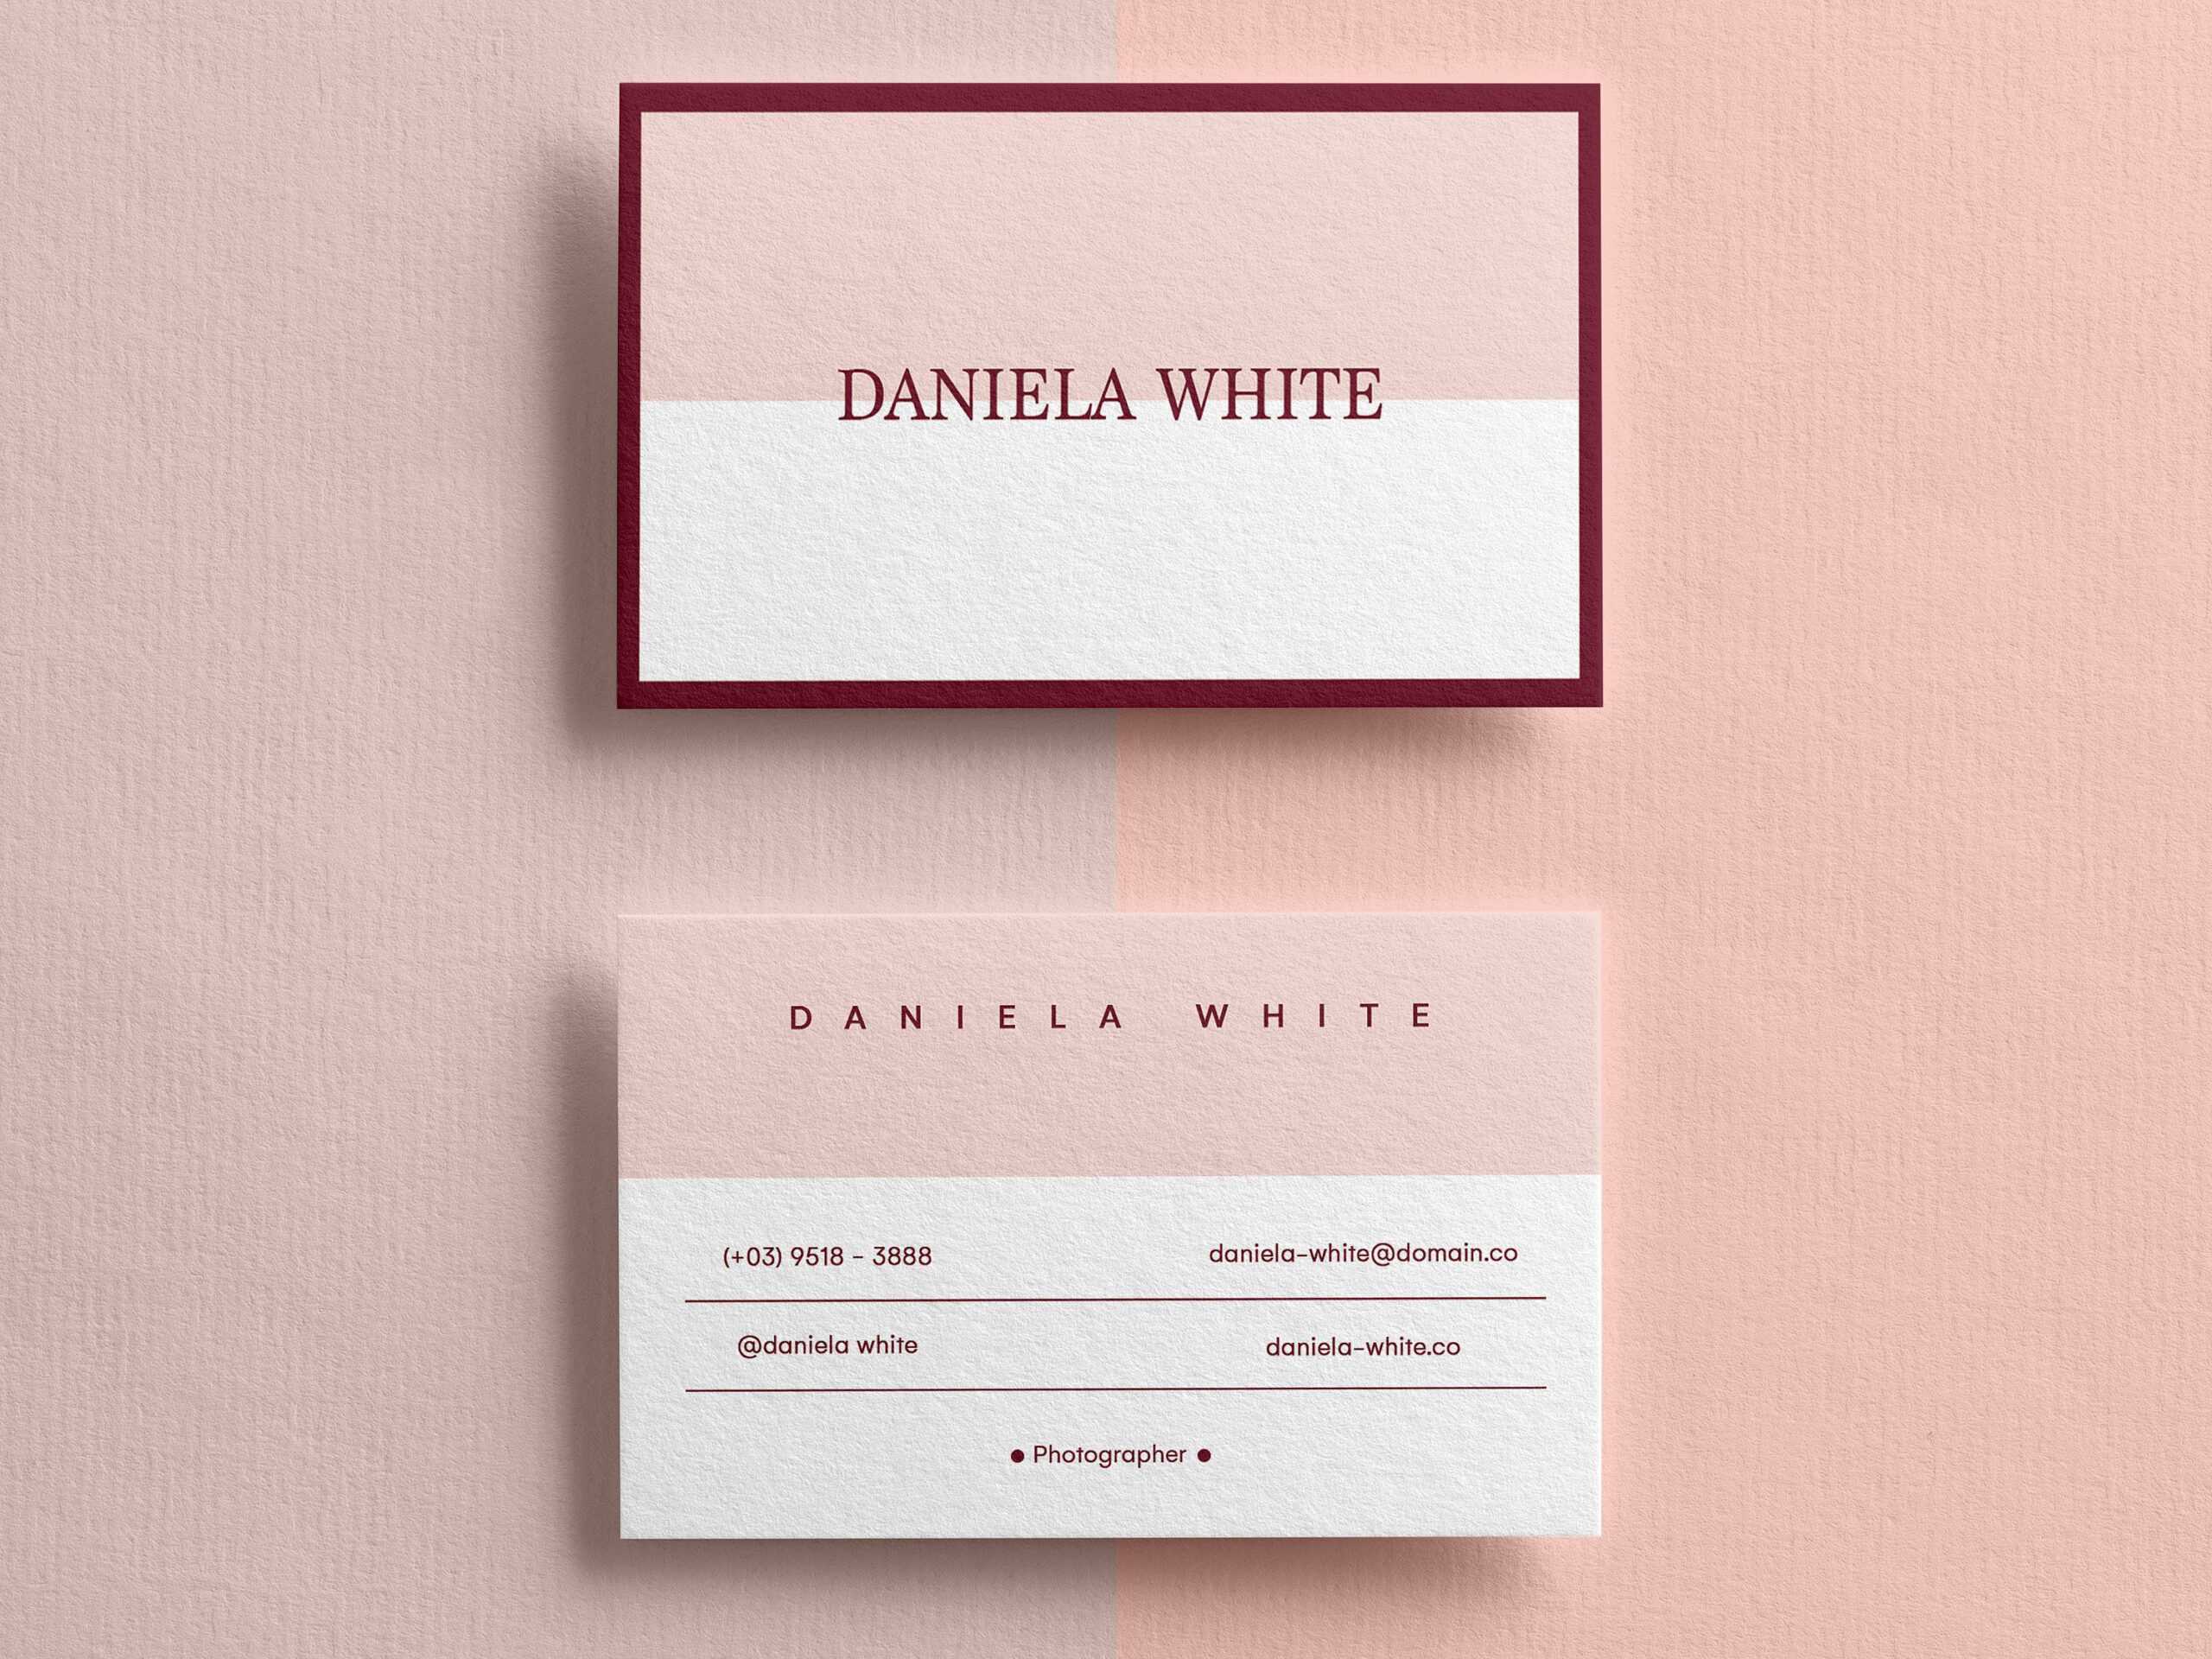 008 Business Card Template Photoshop Fascinating Ideas Blank For Photoshop Cs6 Business Card Template